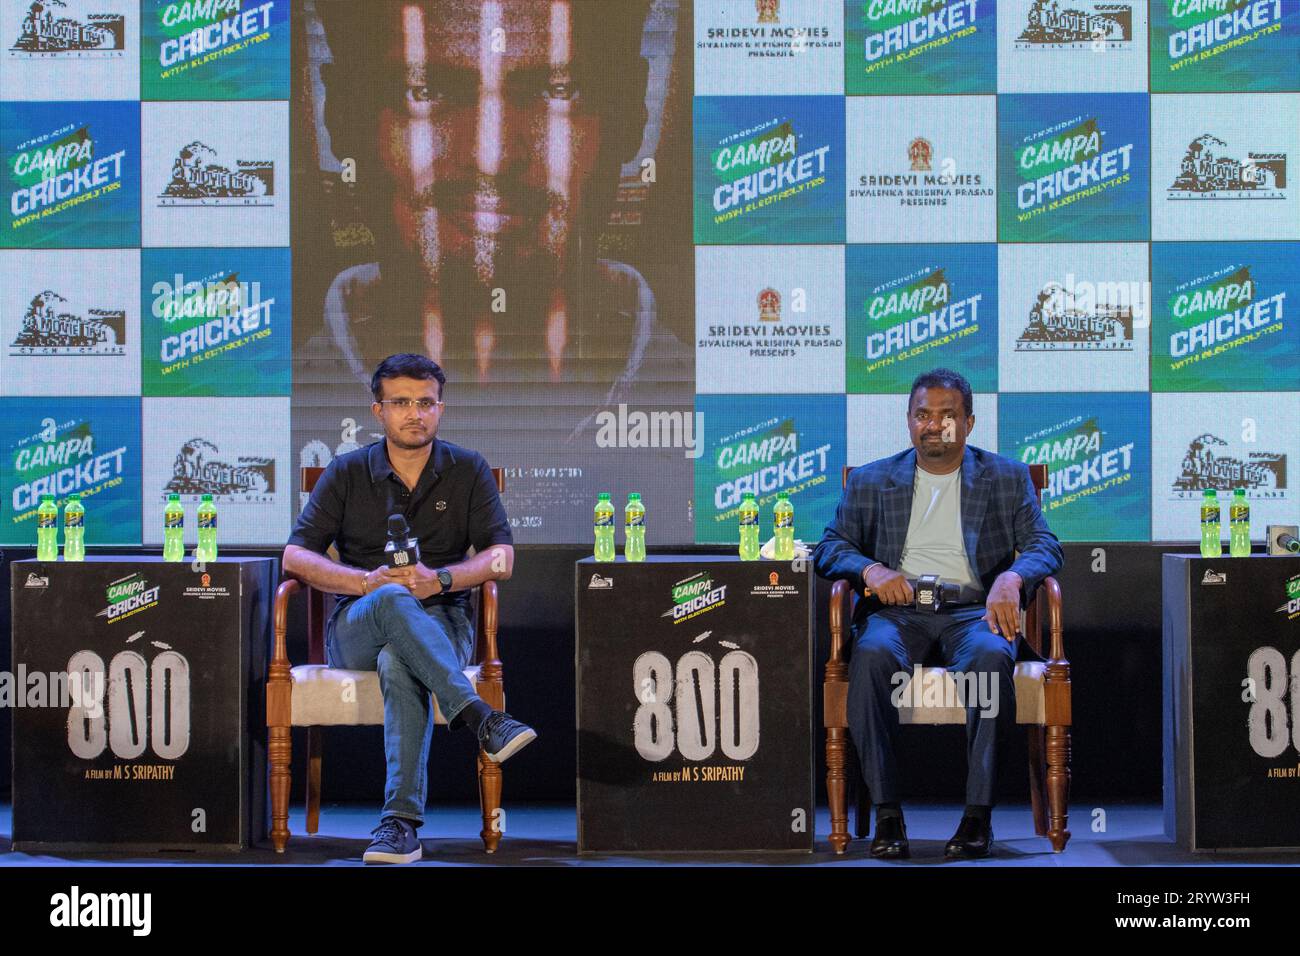 Legendary Sri Lankan cricketer Muthiah Muralidaran and Former Indian Cricket Captain and BCCI President Sourav Ganguly seen during the promotion of film 800, a biopic based on the life and career of cricketer Muthiah Muralidaran. Stock Photo